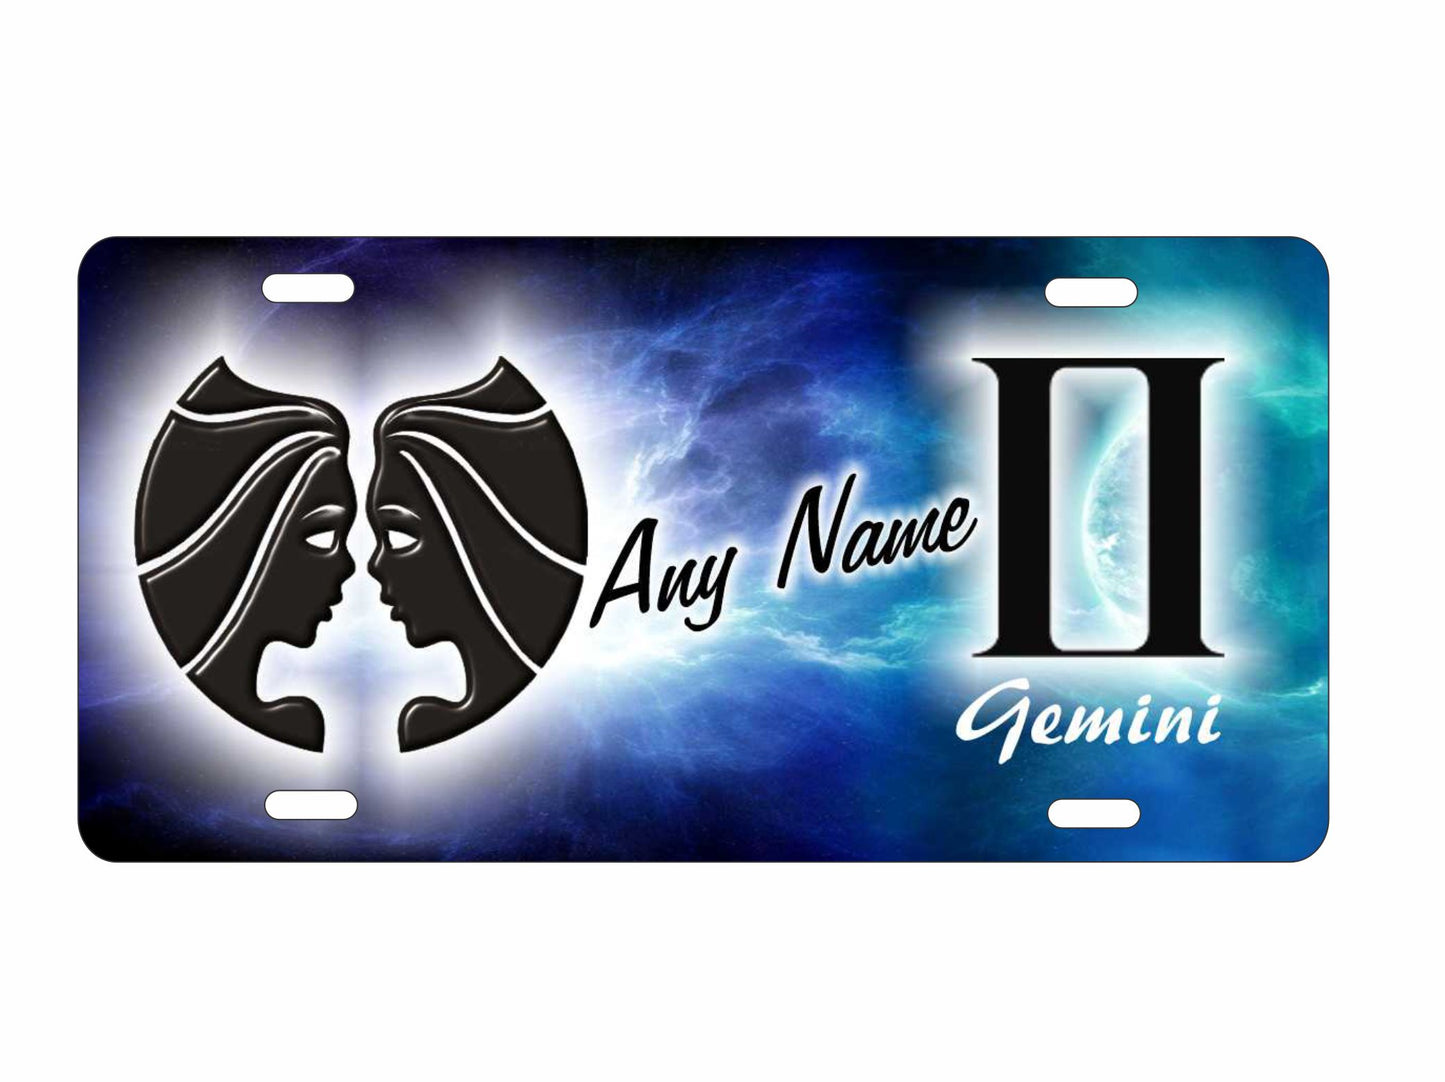 Gemini zodiac symbol Astrological sign personalized novelty decorative front license plate